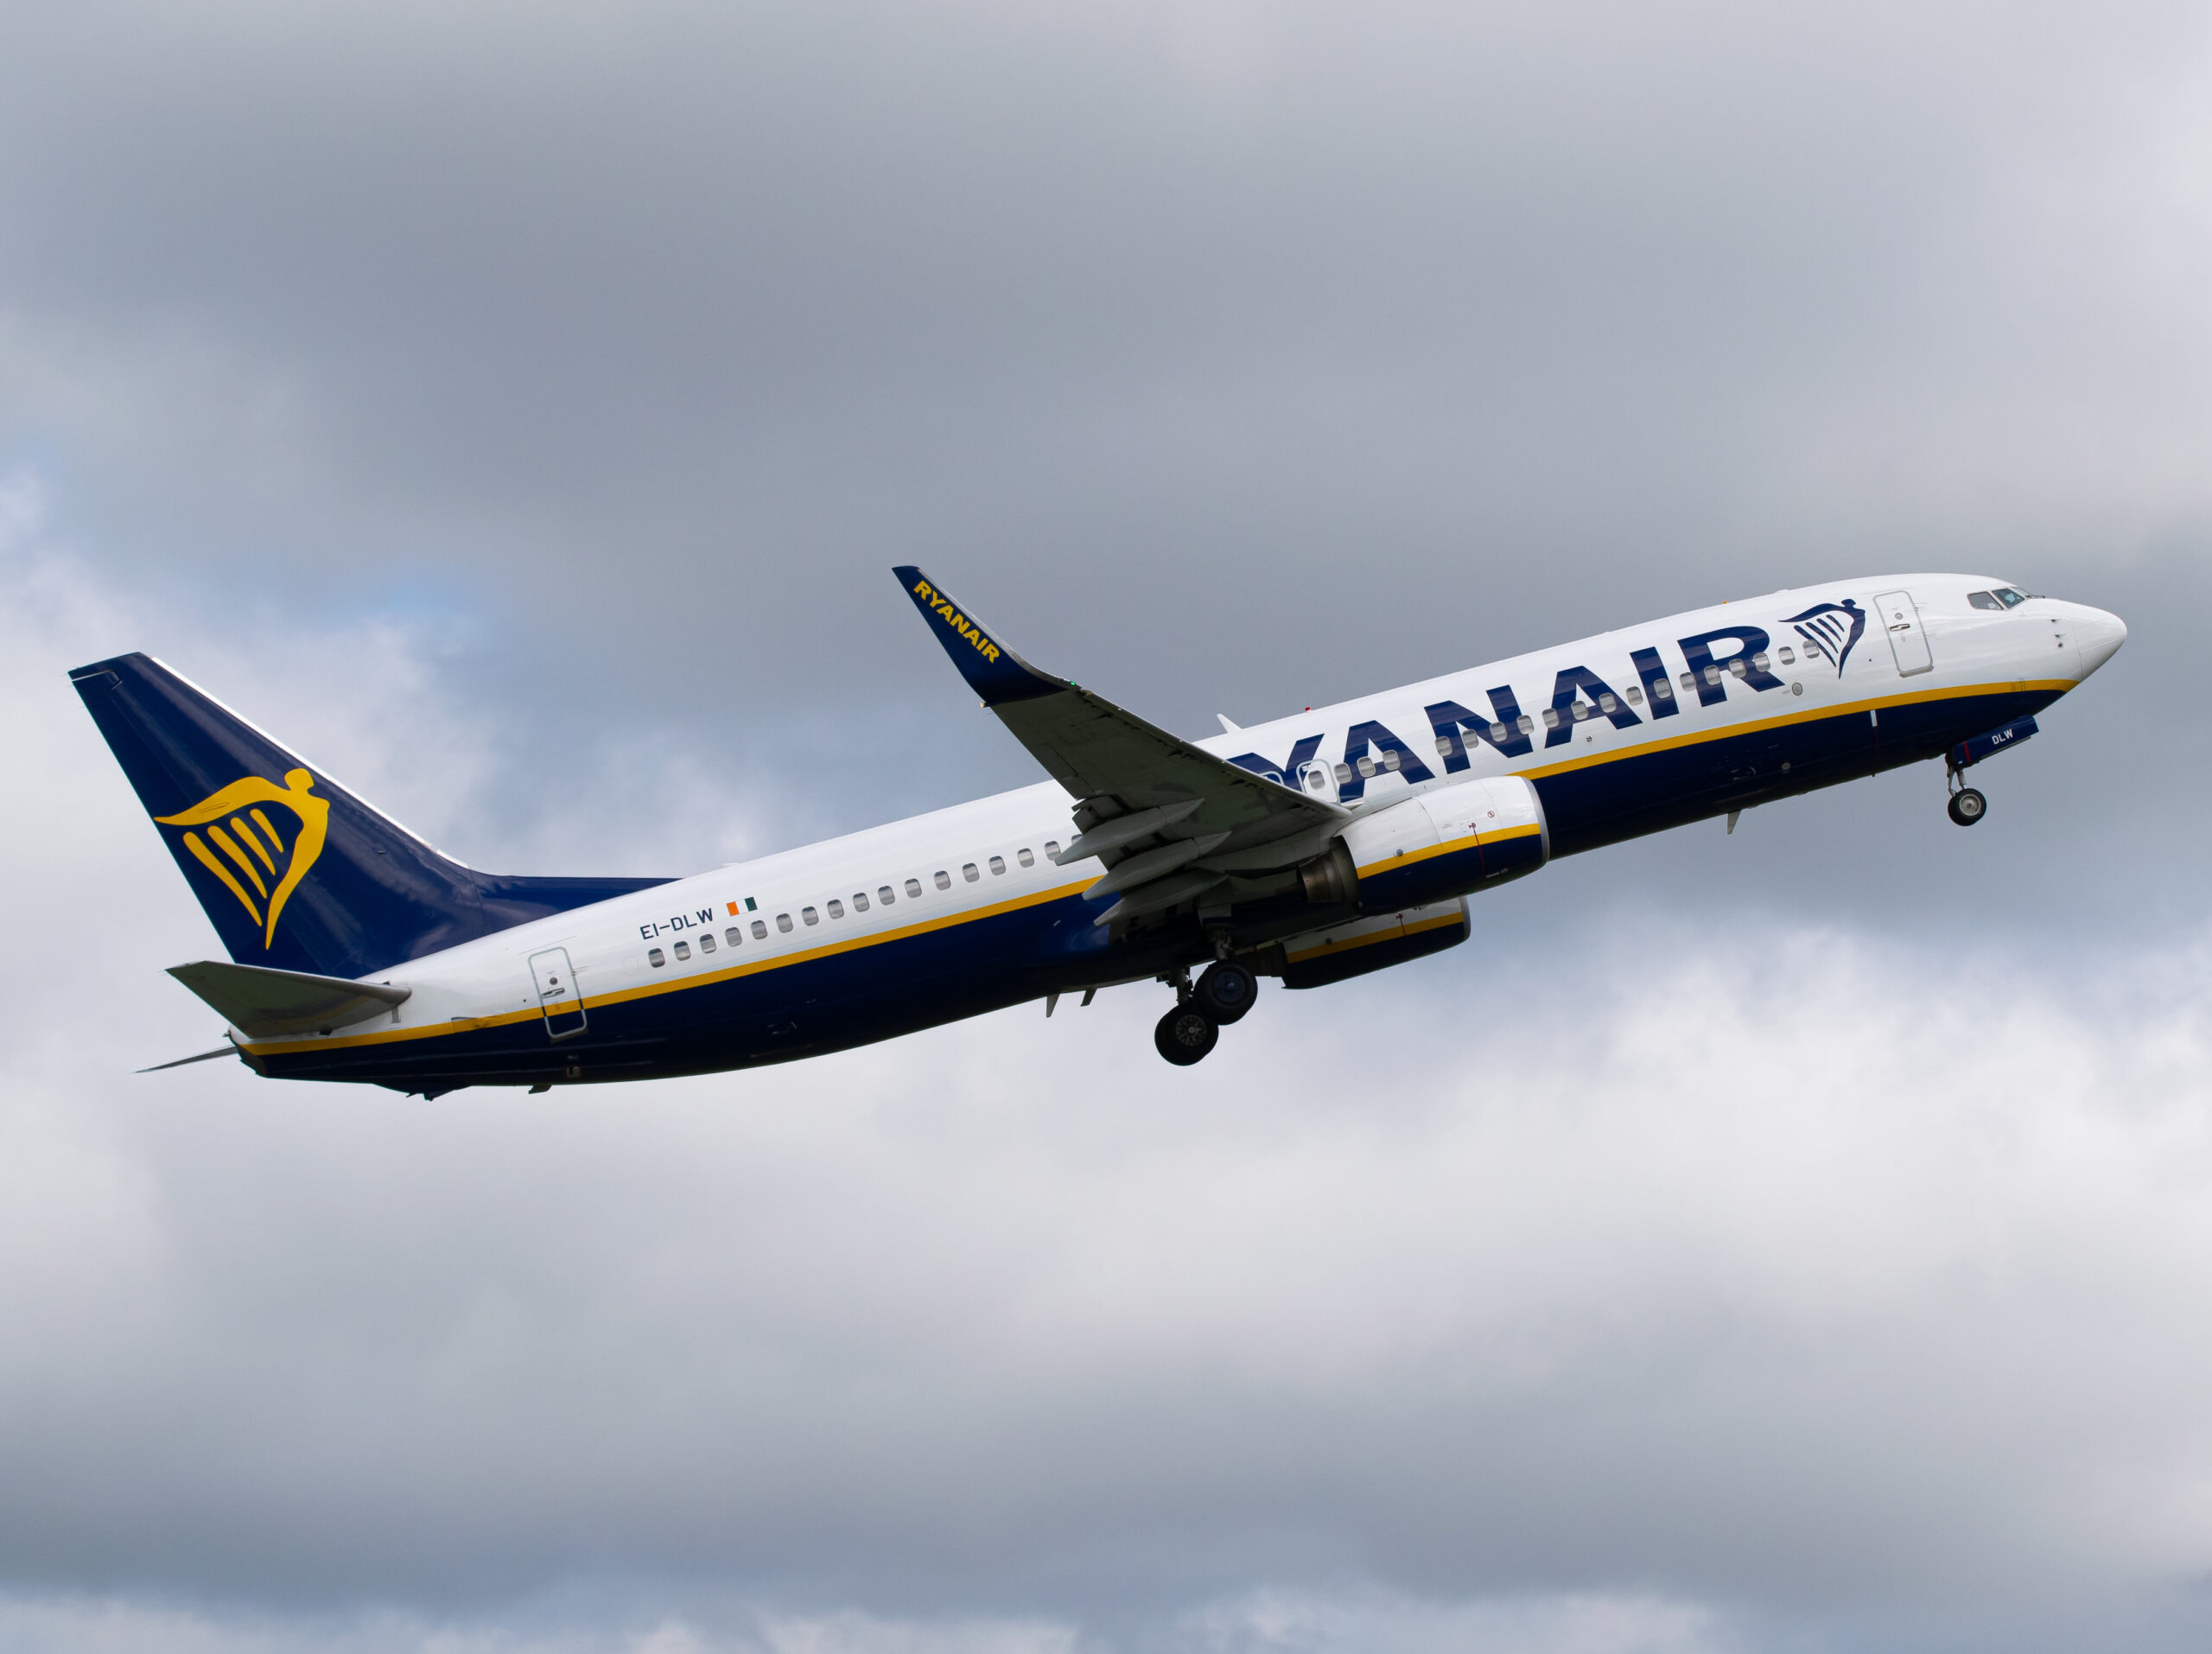 Why Has Ryanair Been So Successful?